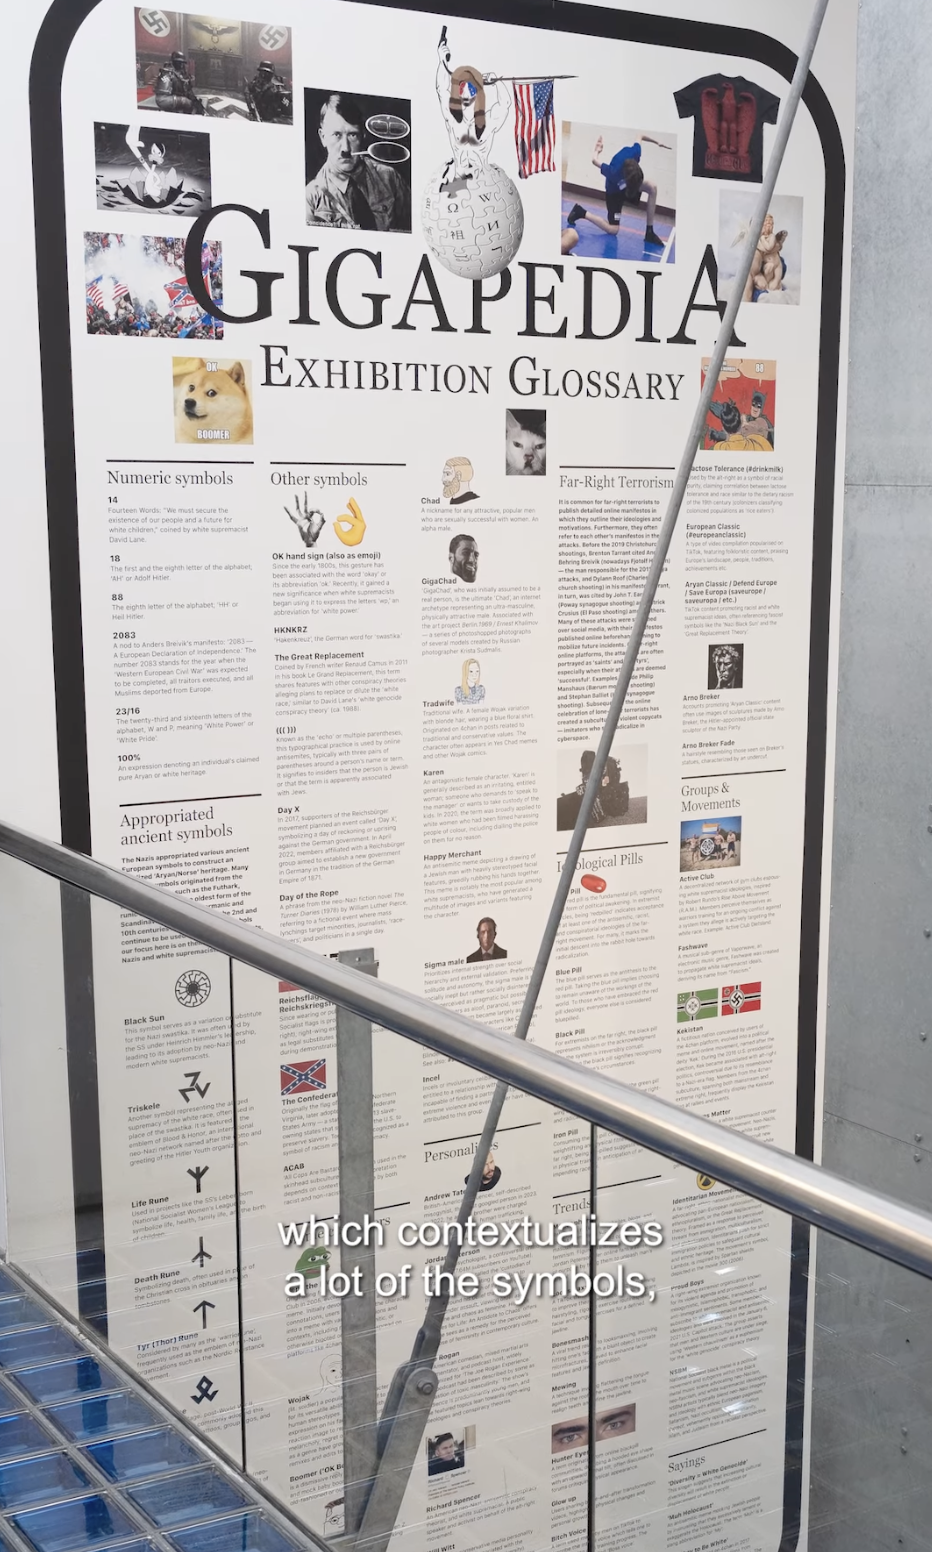 Image of a big glossary in an exhibition space